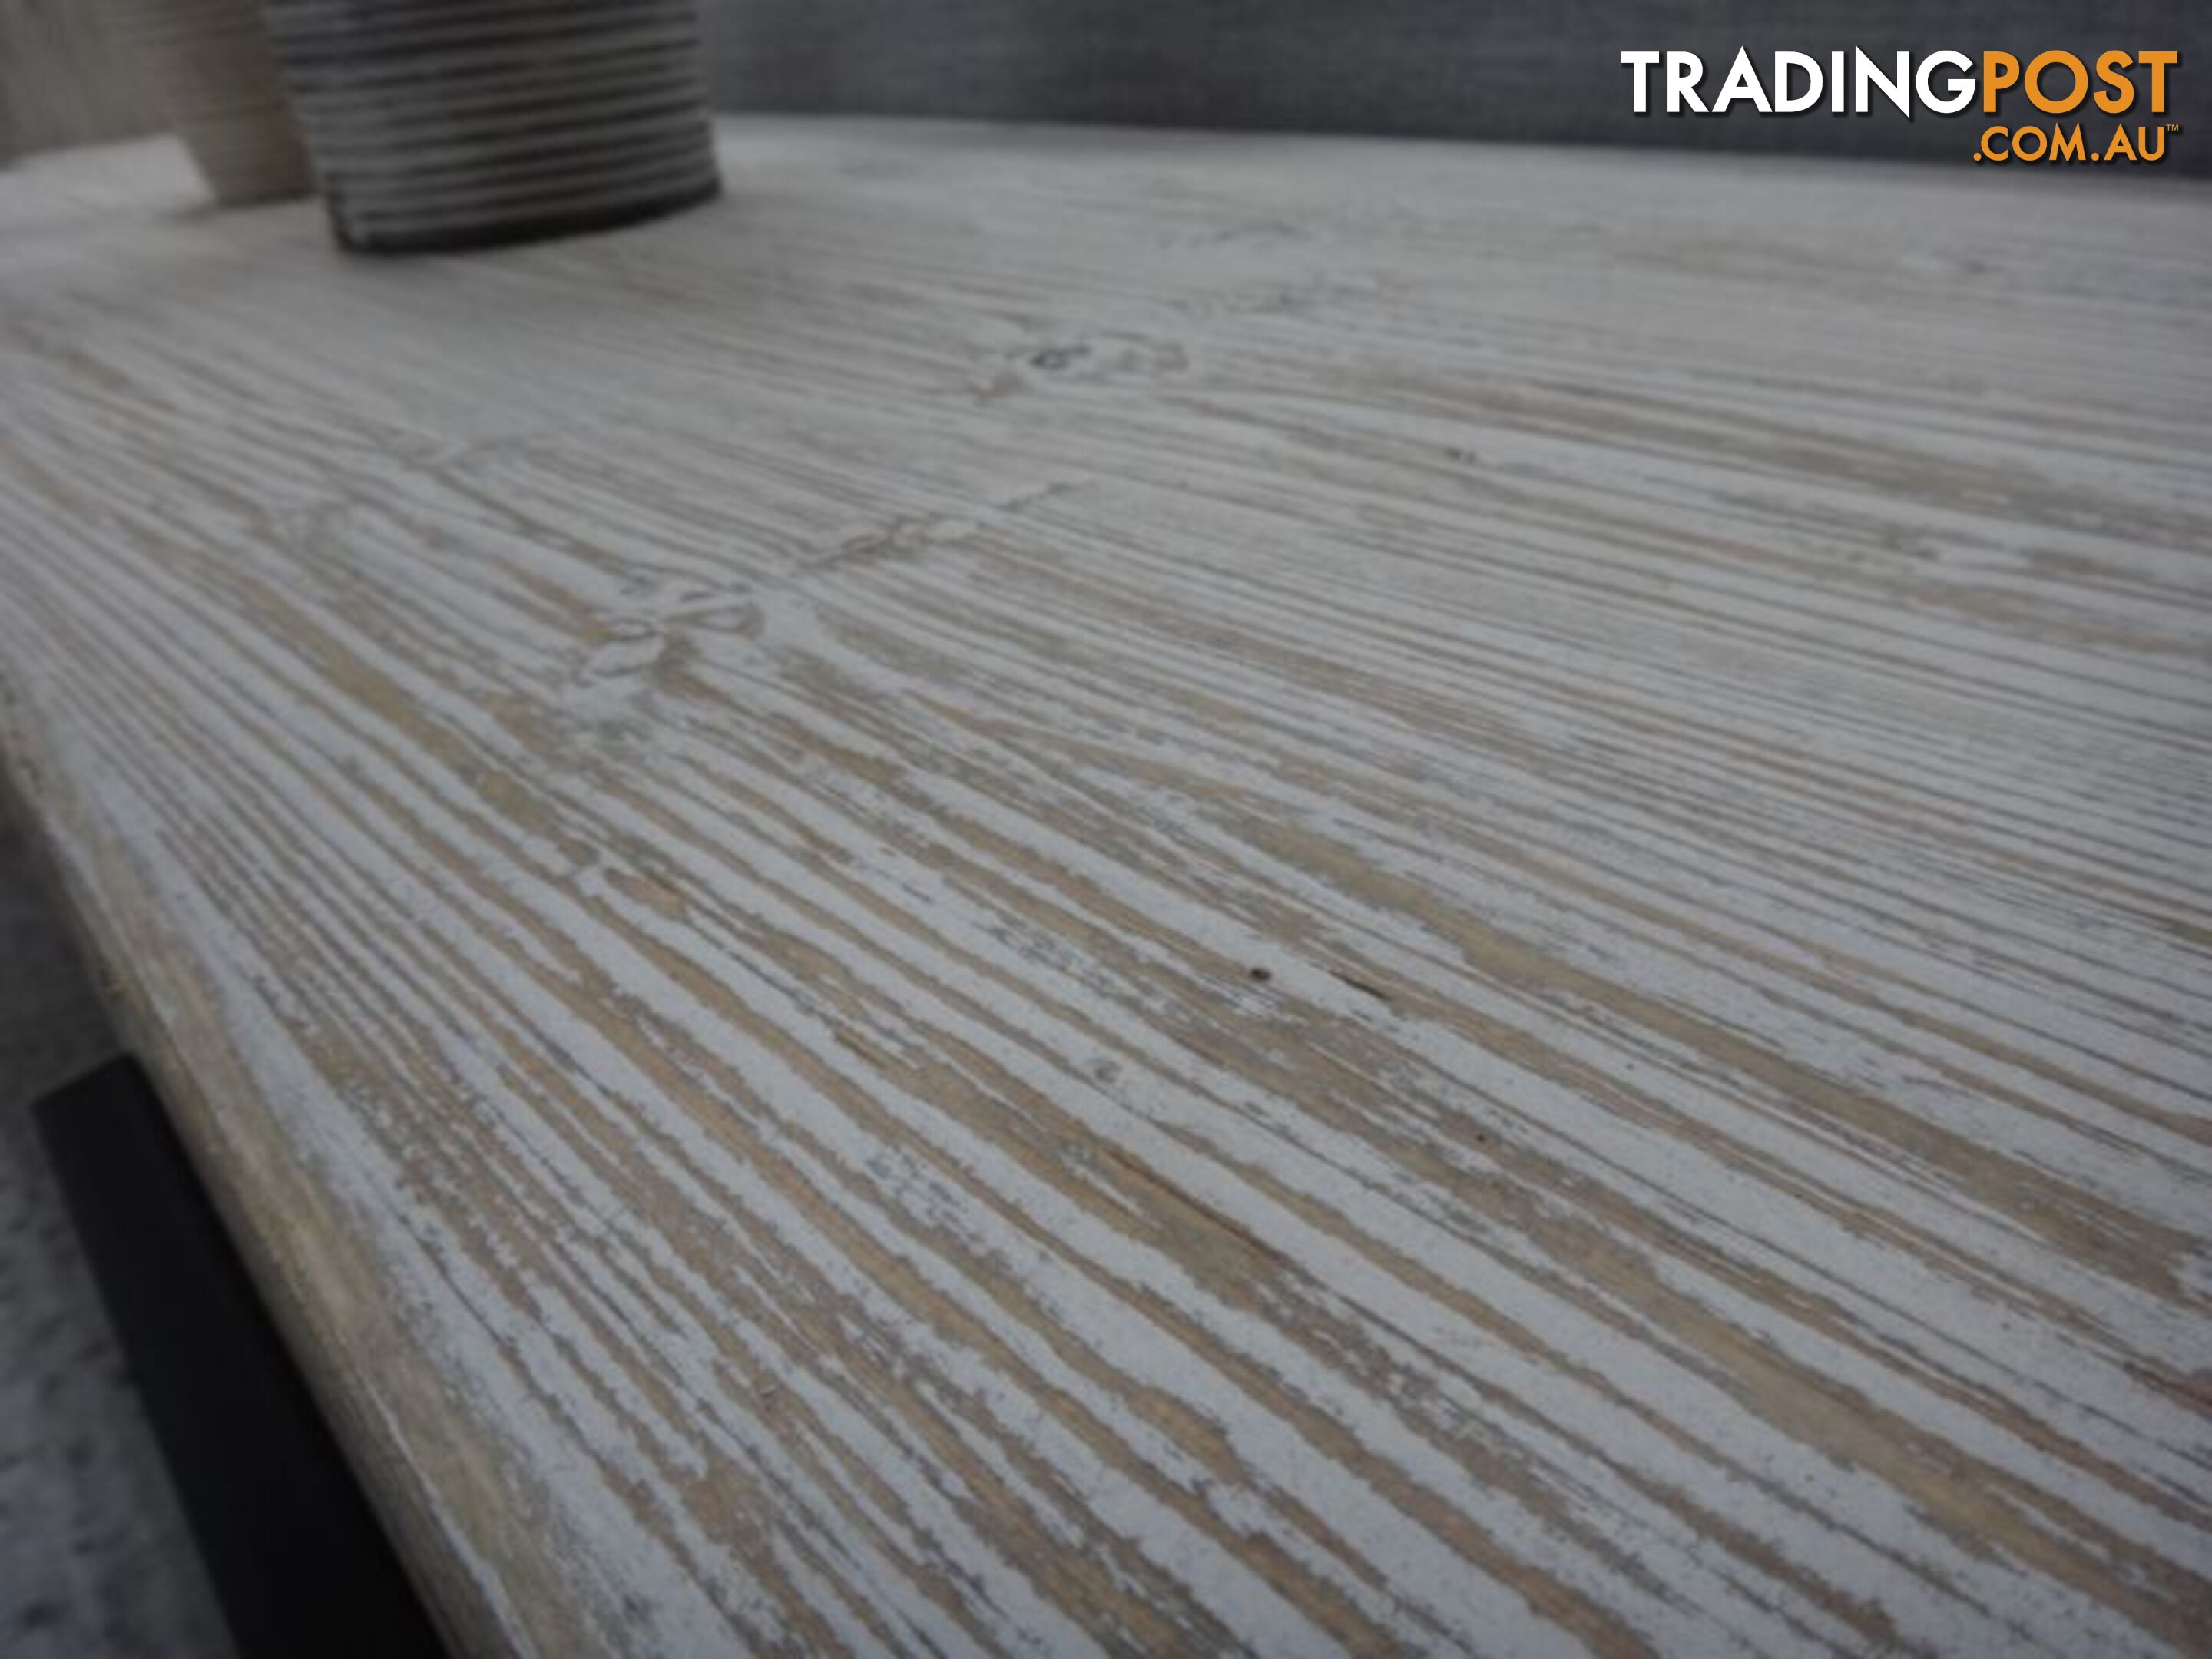 NEW MORGAN ETU - SOLID TIMBER BRAND NEW CLEARANCE STOCK